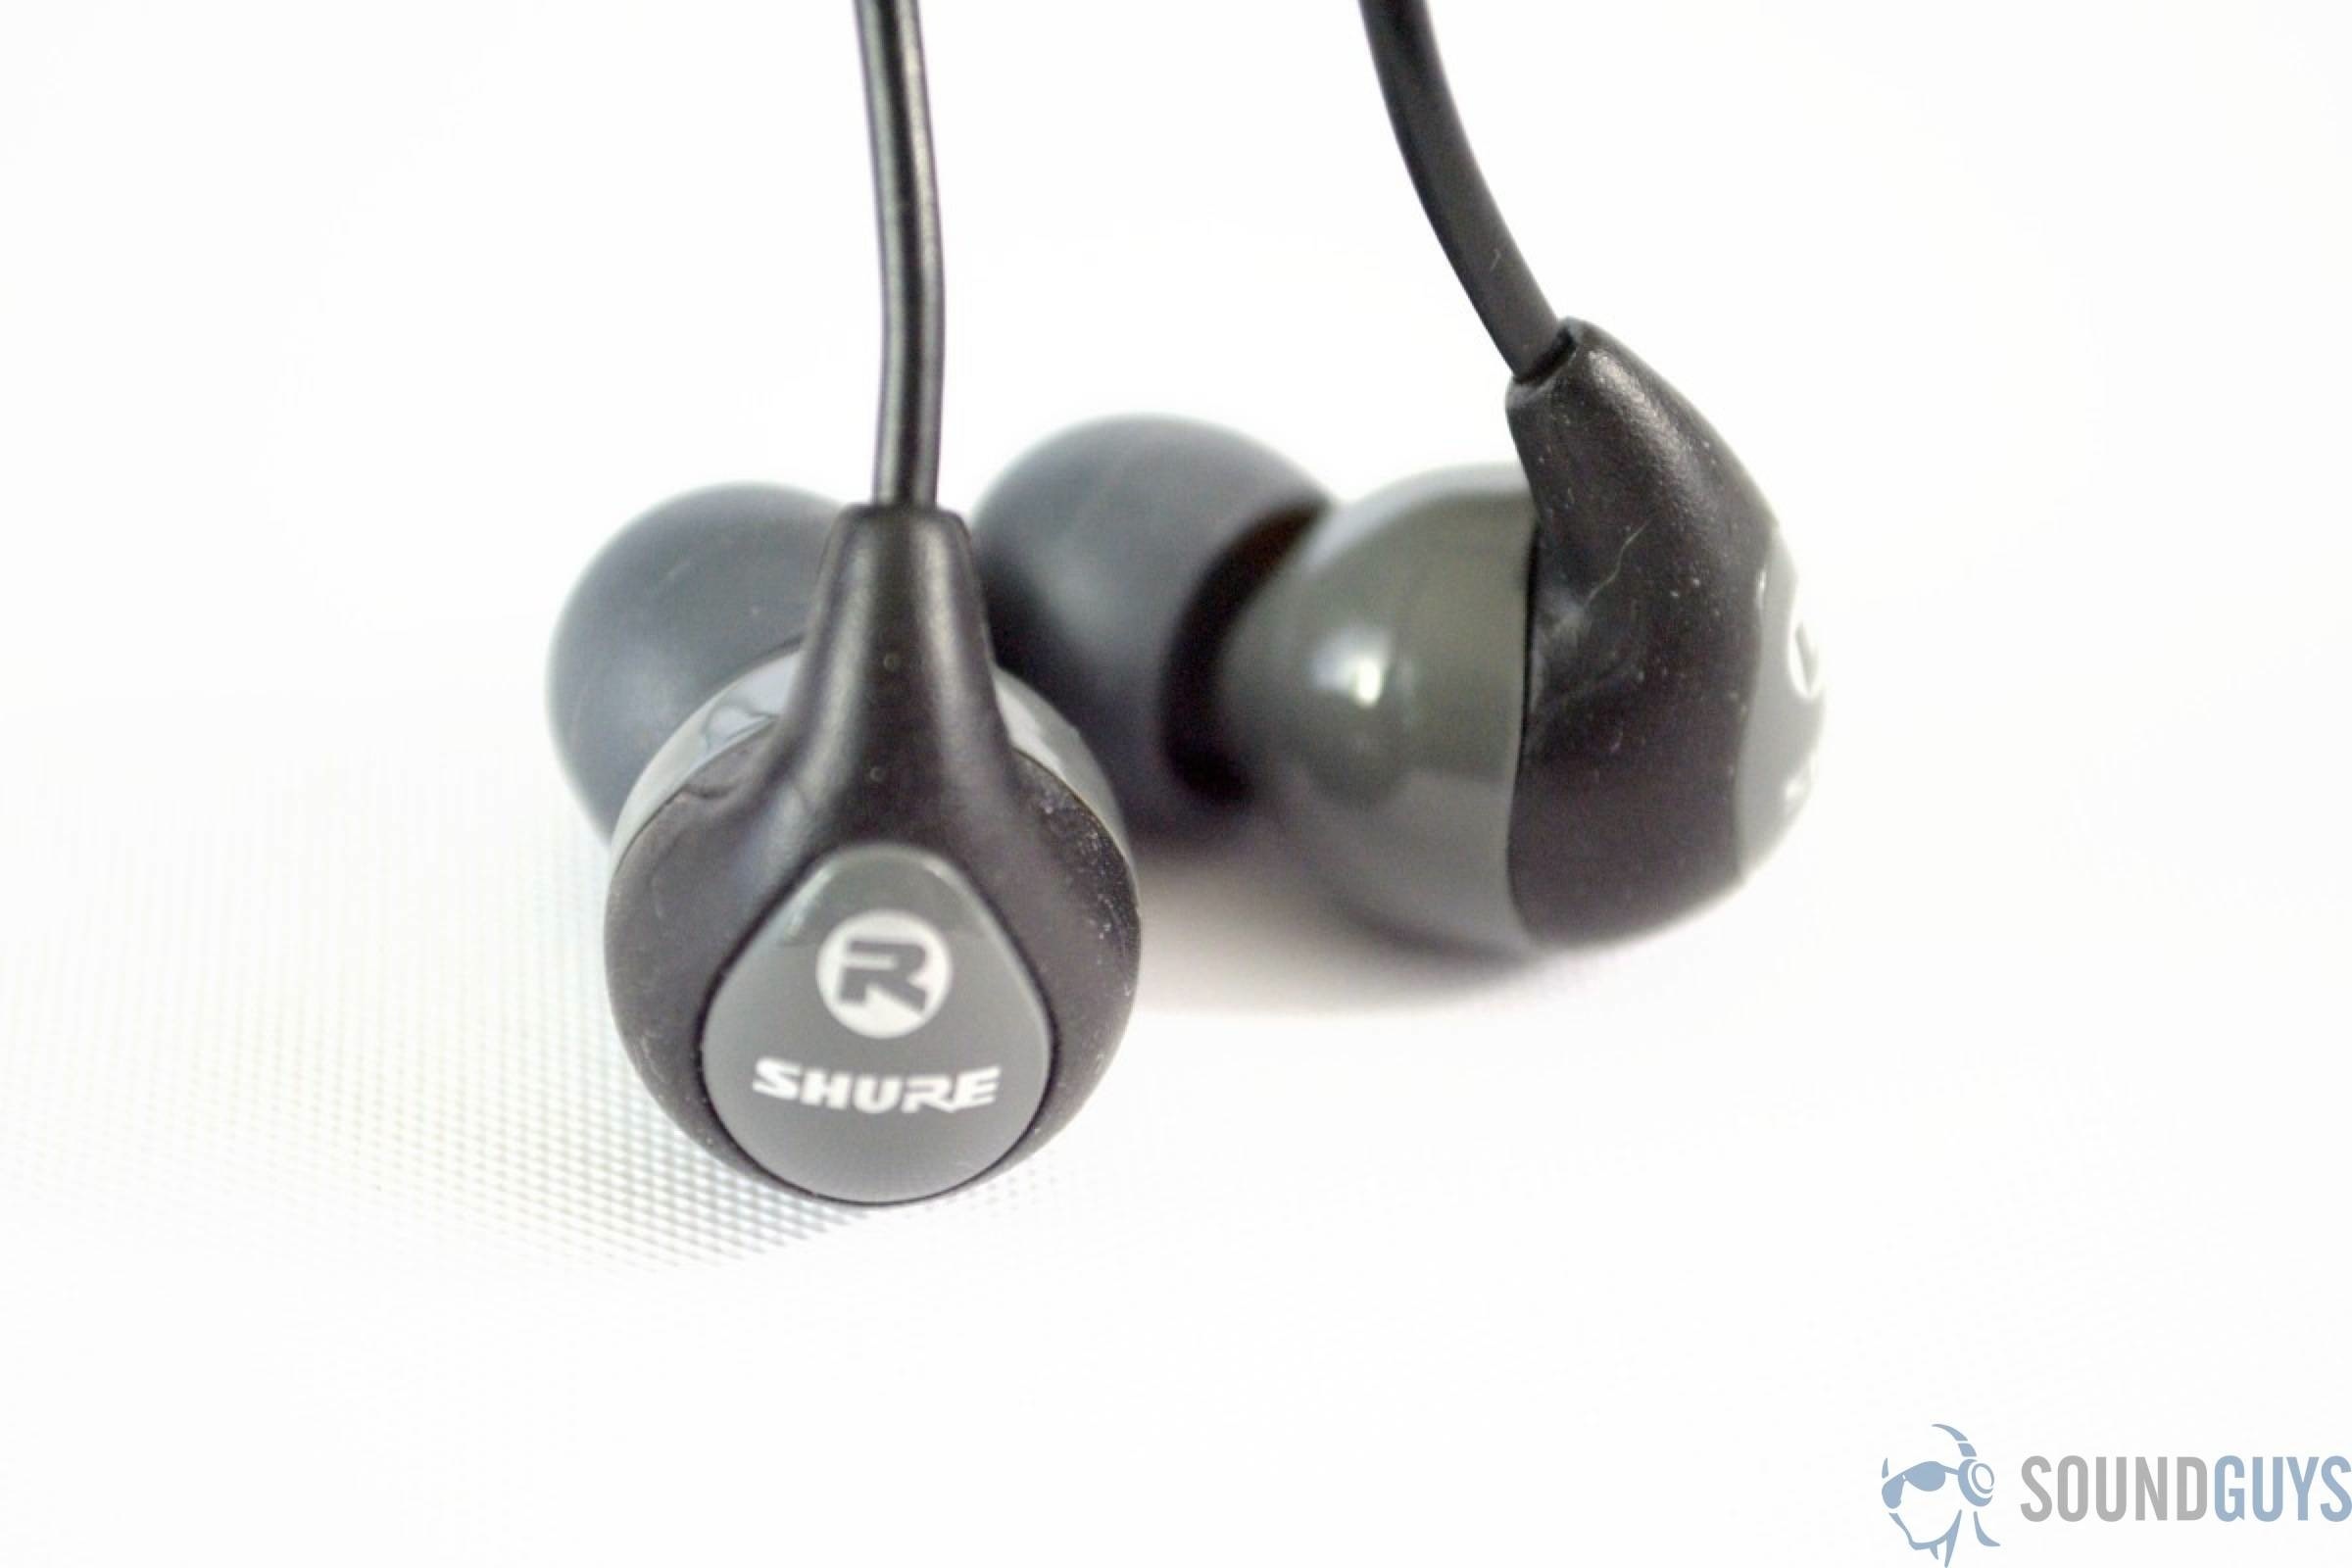 The Shure SE112 GR earbuds in grey on a white background.